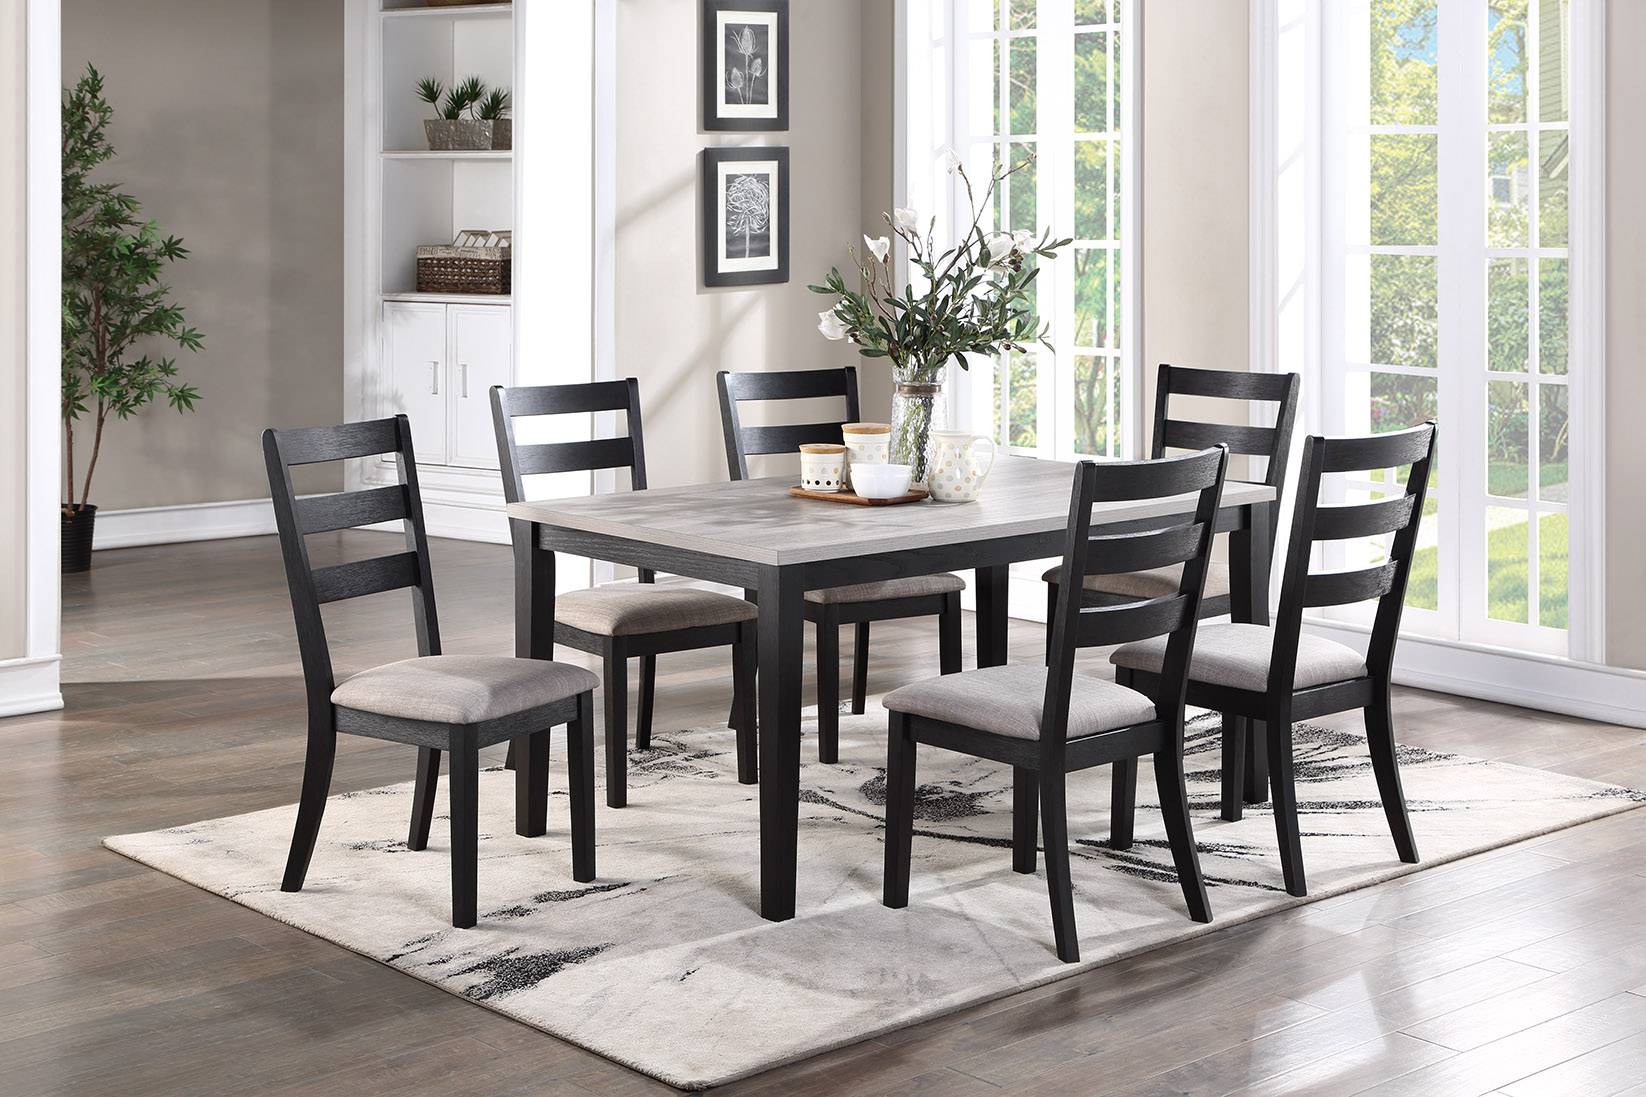 ZNTS Natural Simple Wooden Table Top 7pc Dining Set Dining Room Furniture Ladder back Side Chairs Cushion B01146564